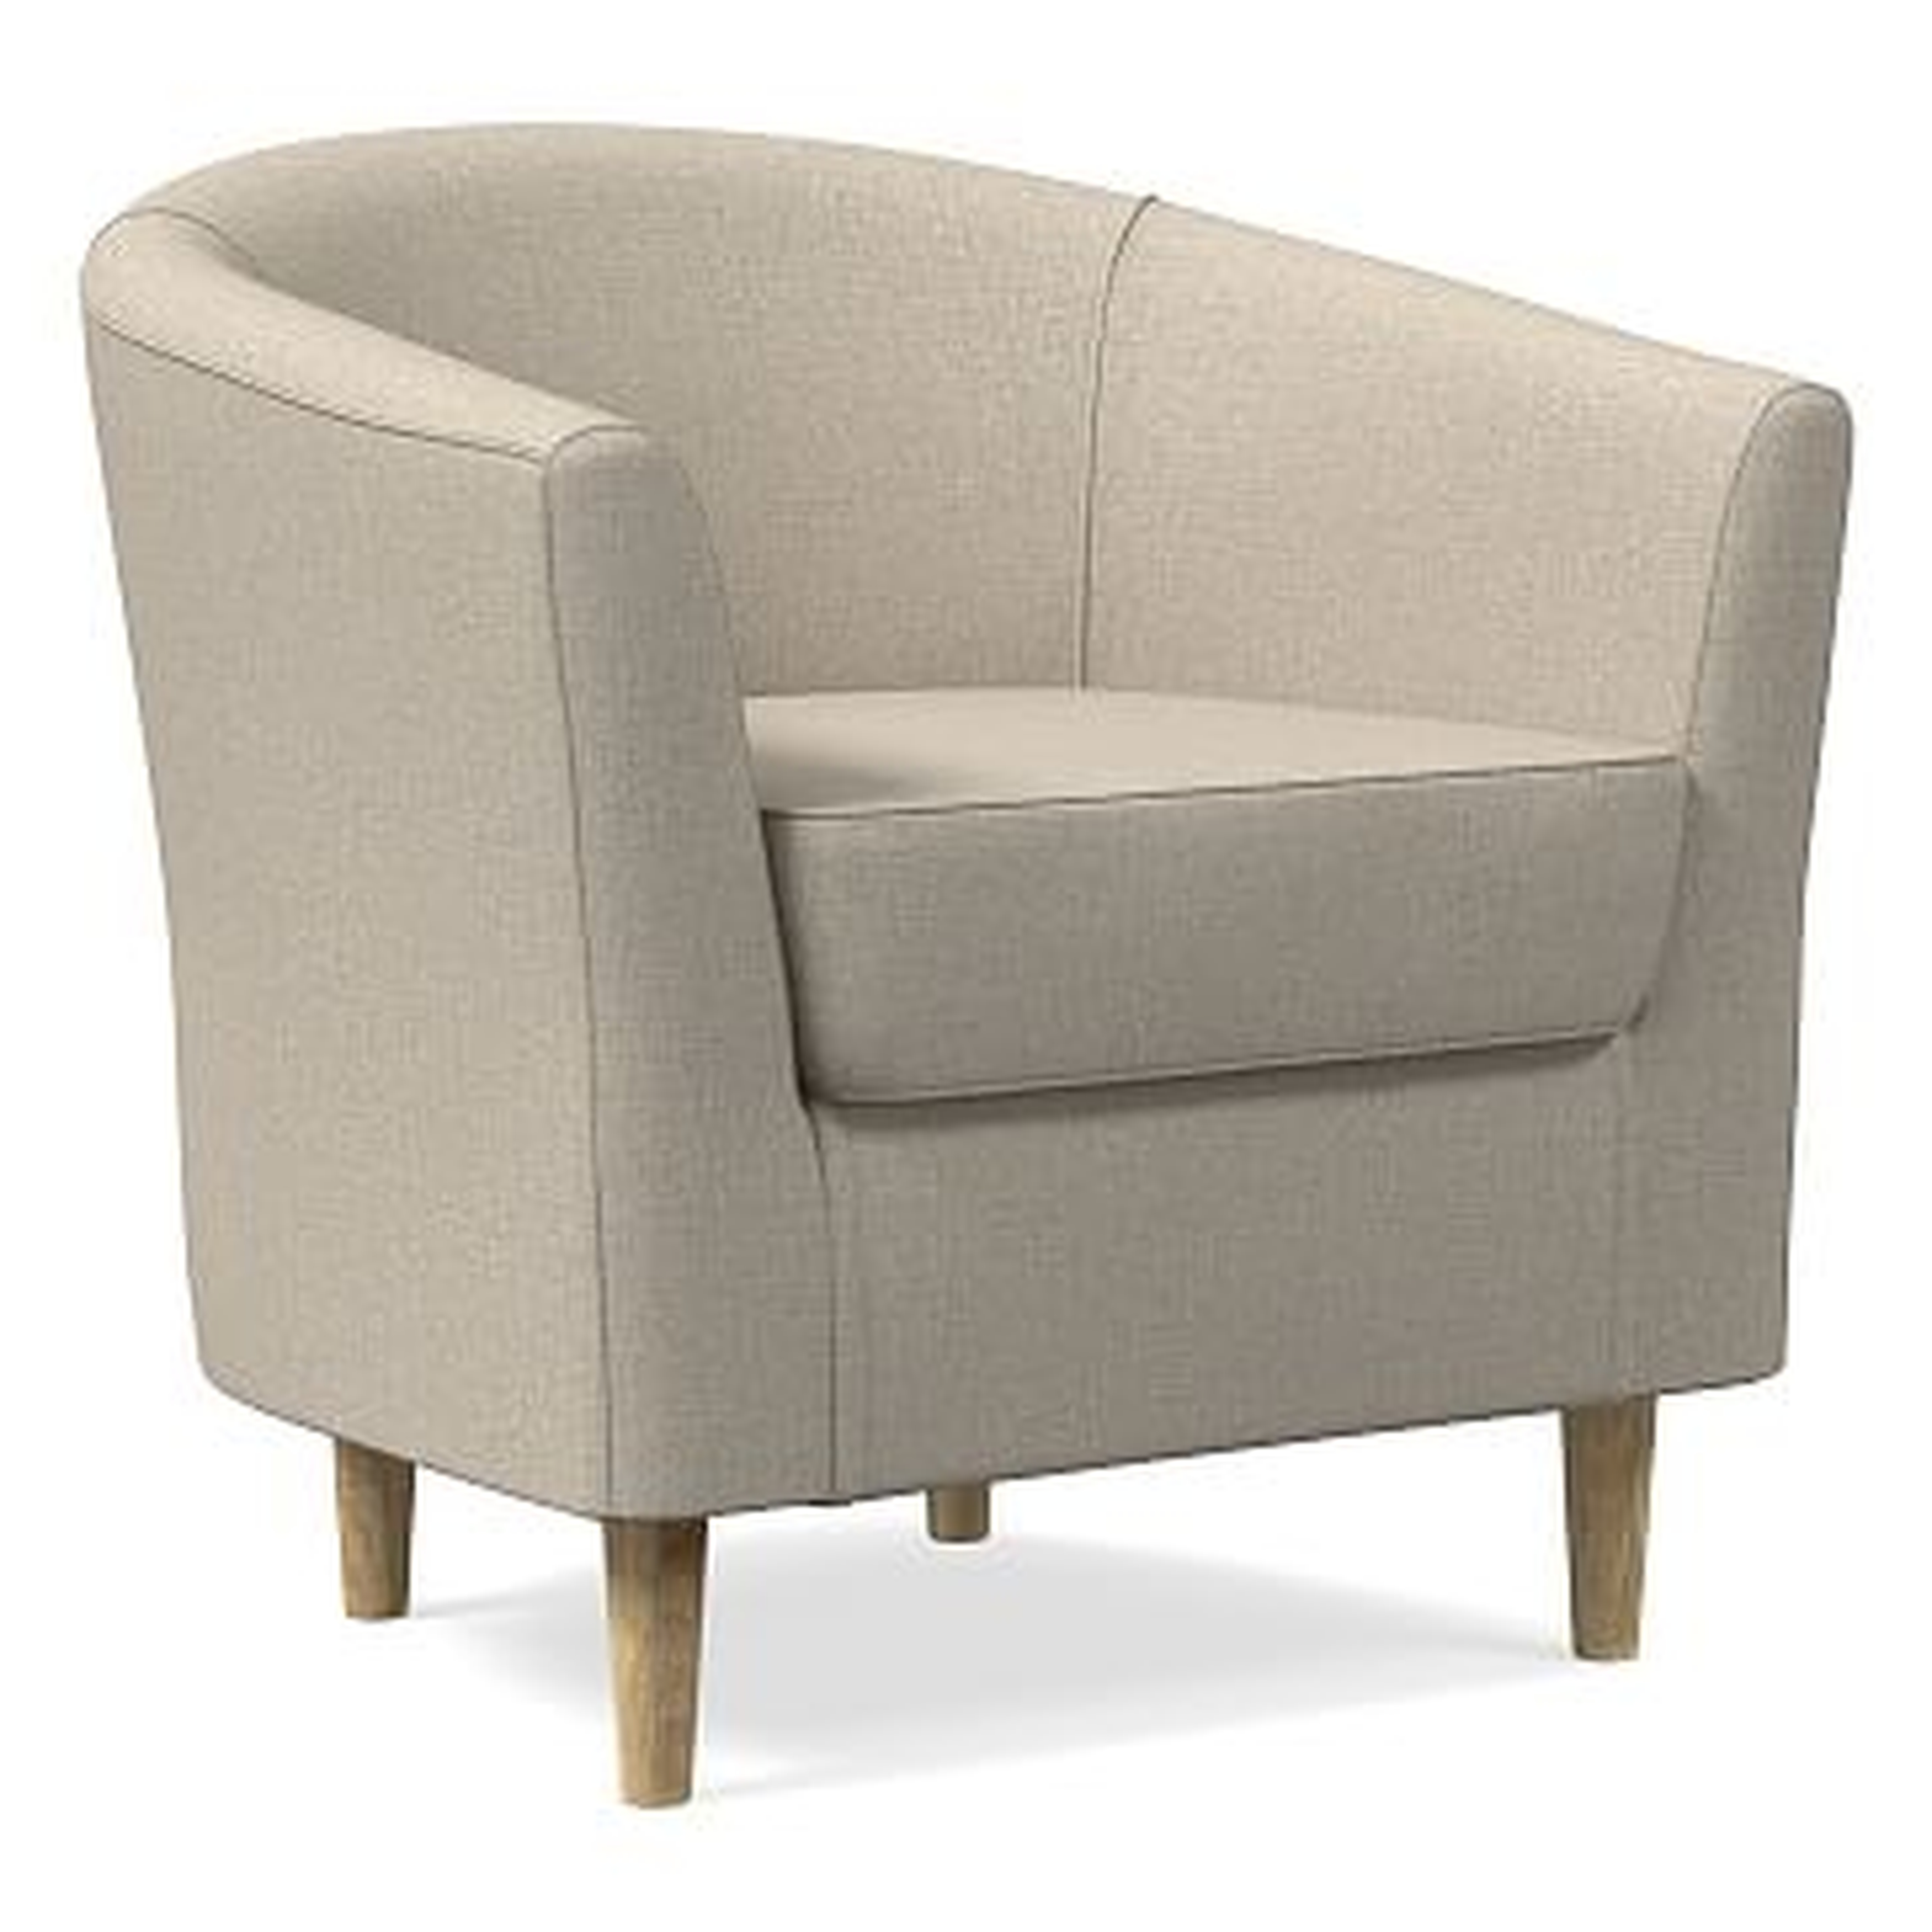 Mila Chair, Poly, Heathered Crosshatch, Natural, Soft Wheat - West Elm